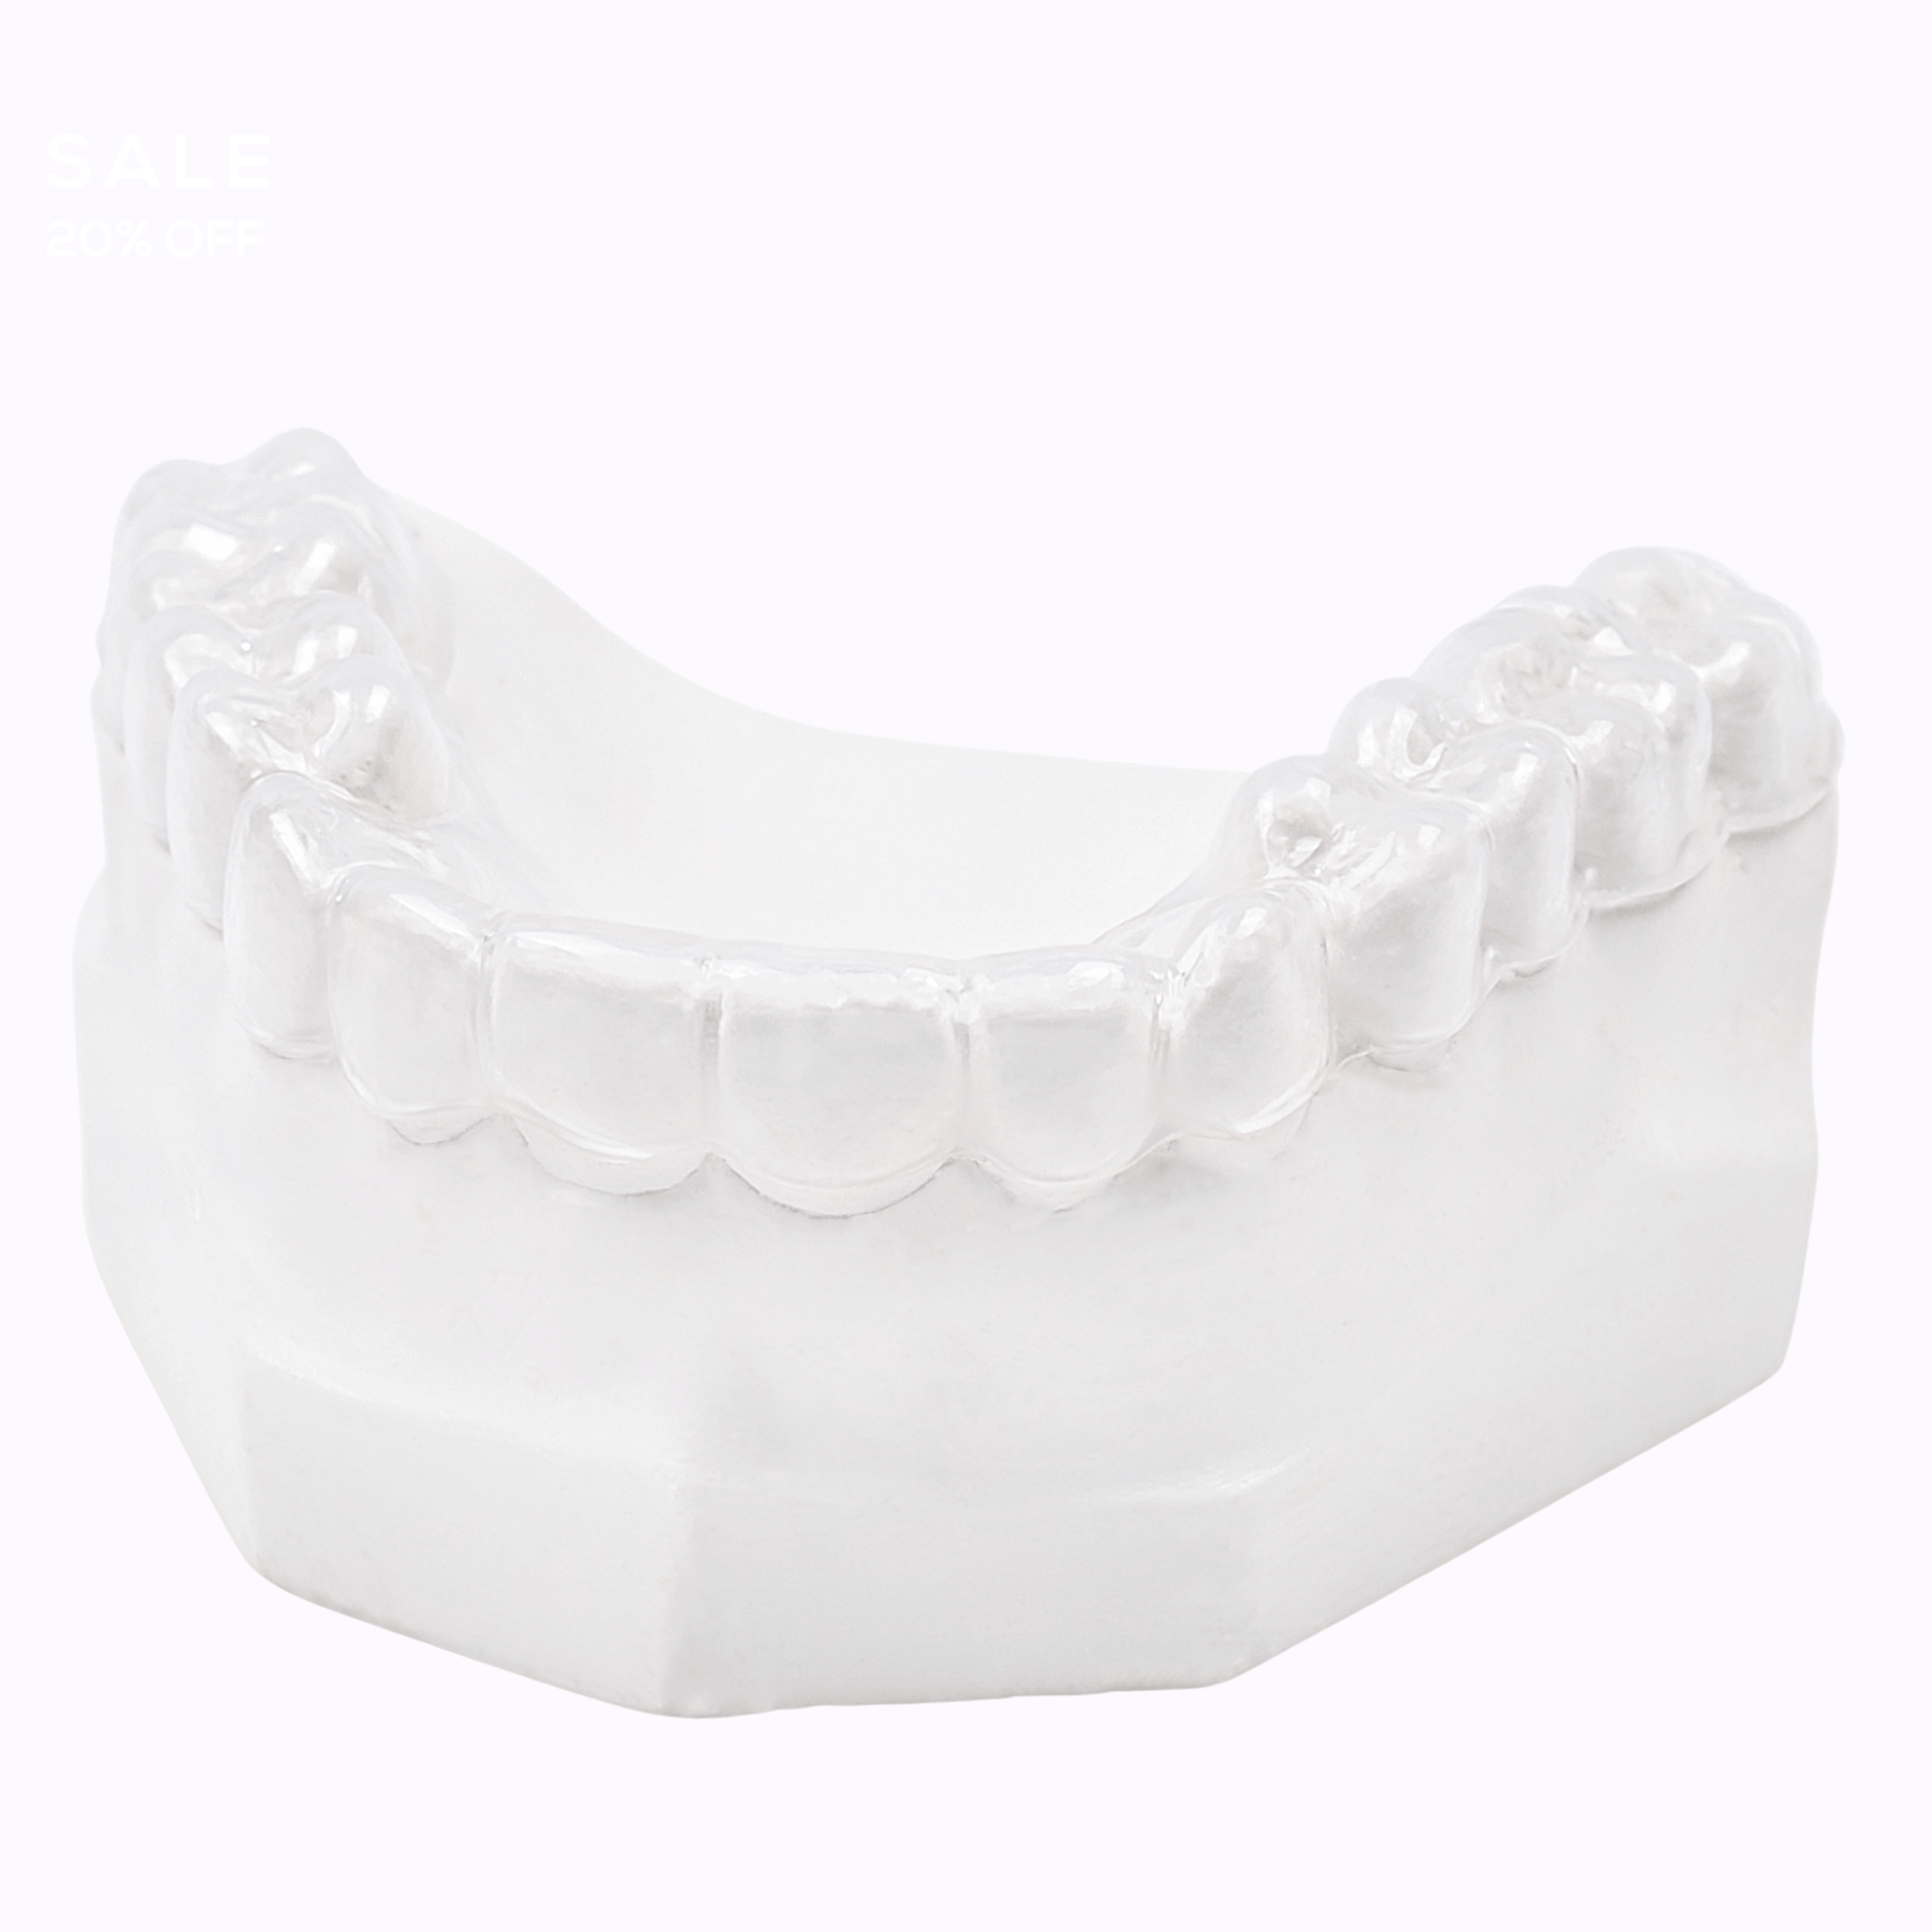 The Daytime Ultra Thin Night Guard - for daytime teeth grinding and clenching